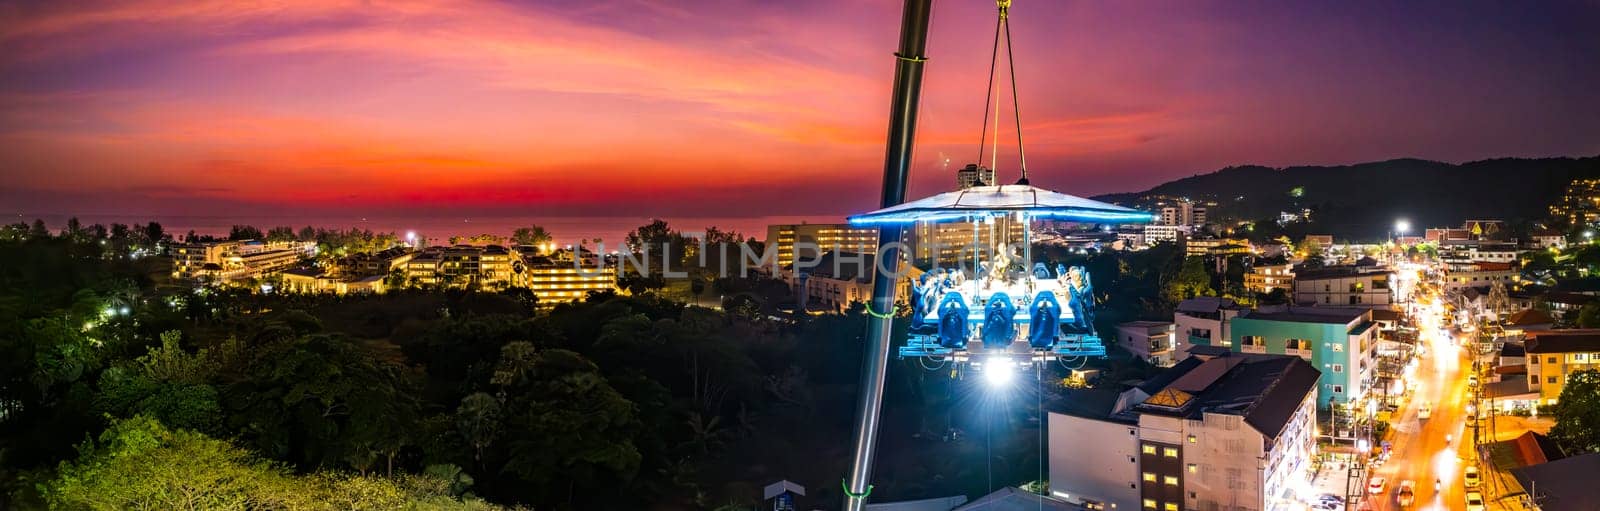 Aerial view of a dinner in the sky in Karon, Phuket, Thailand by worldpitou